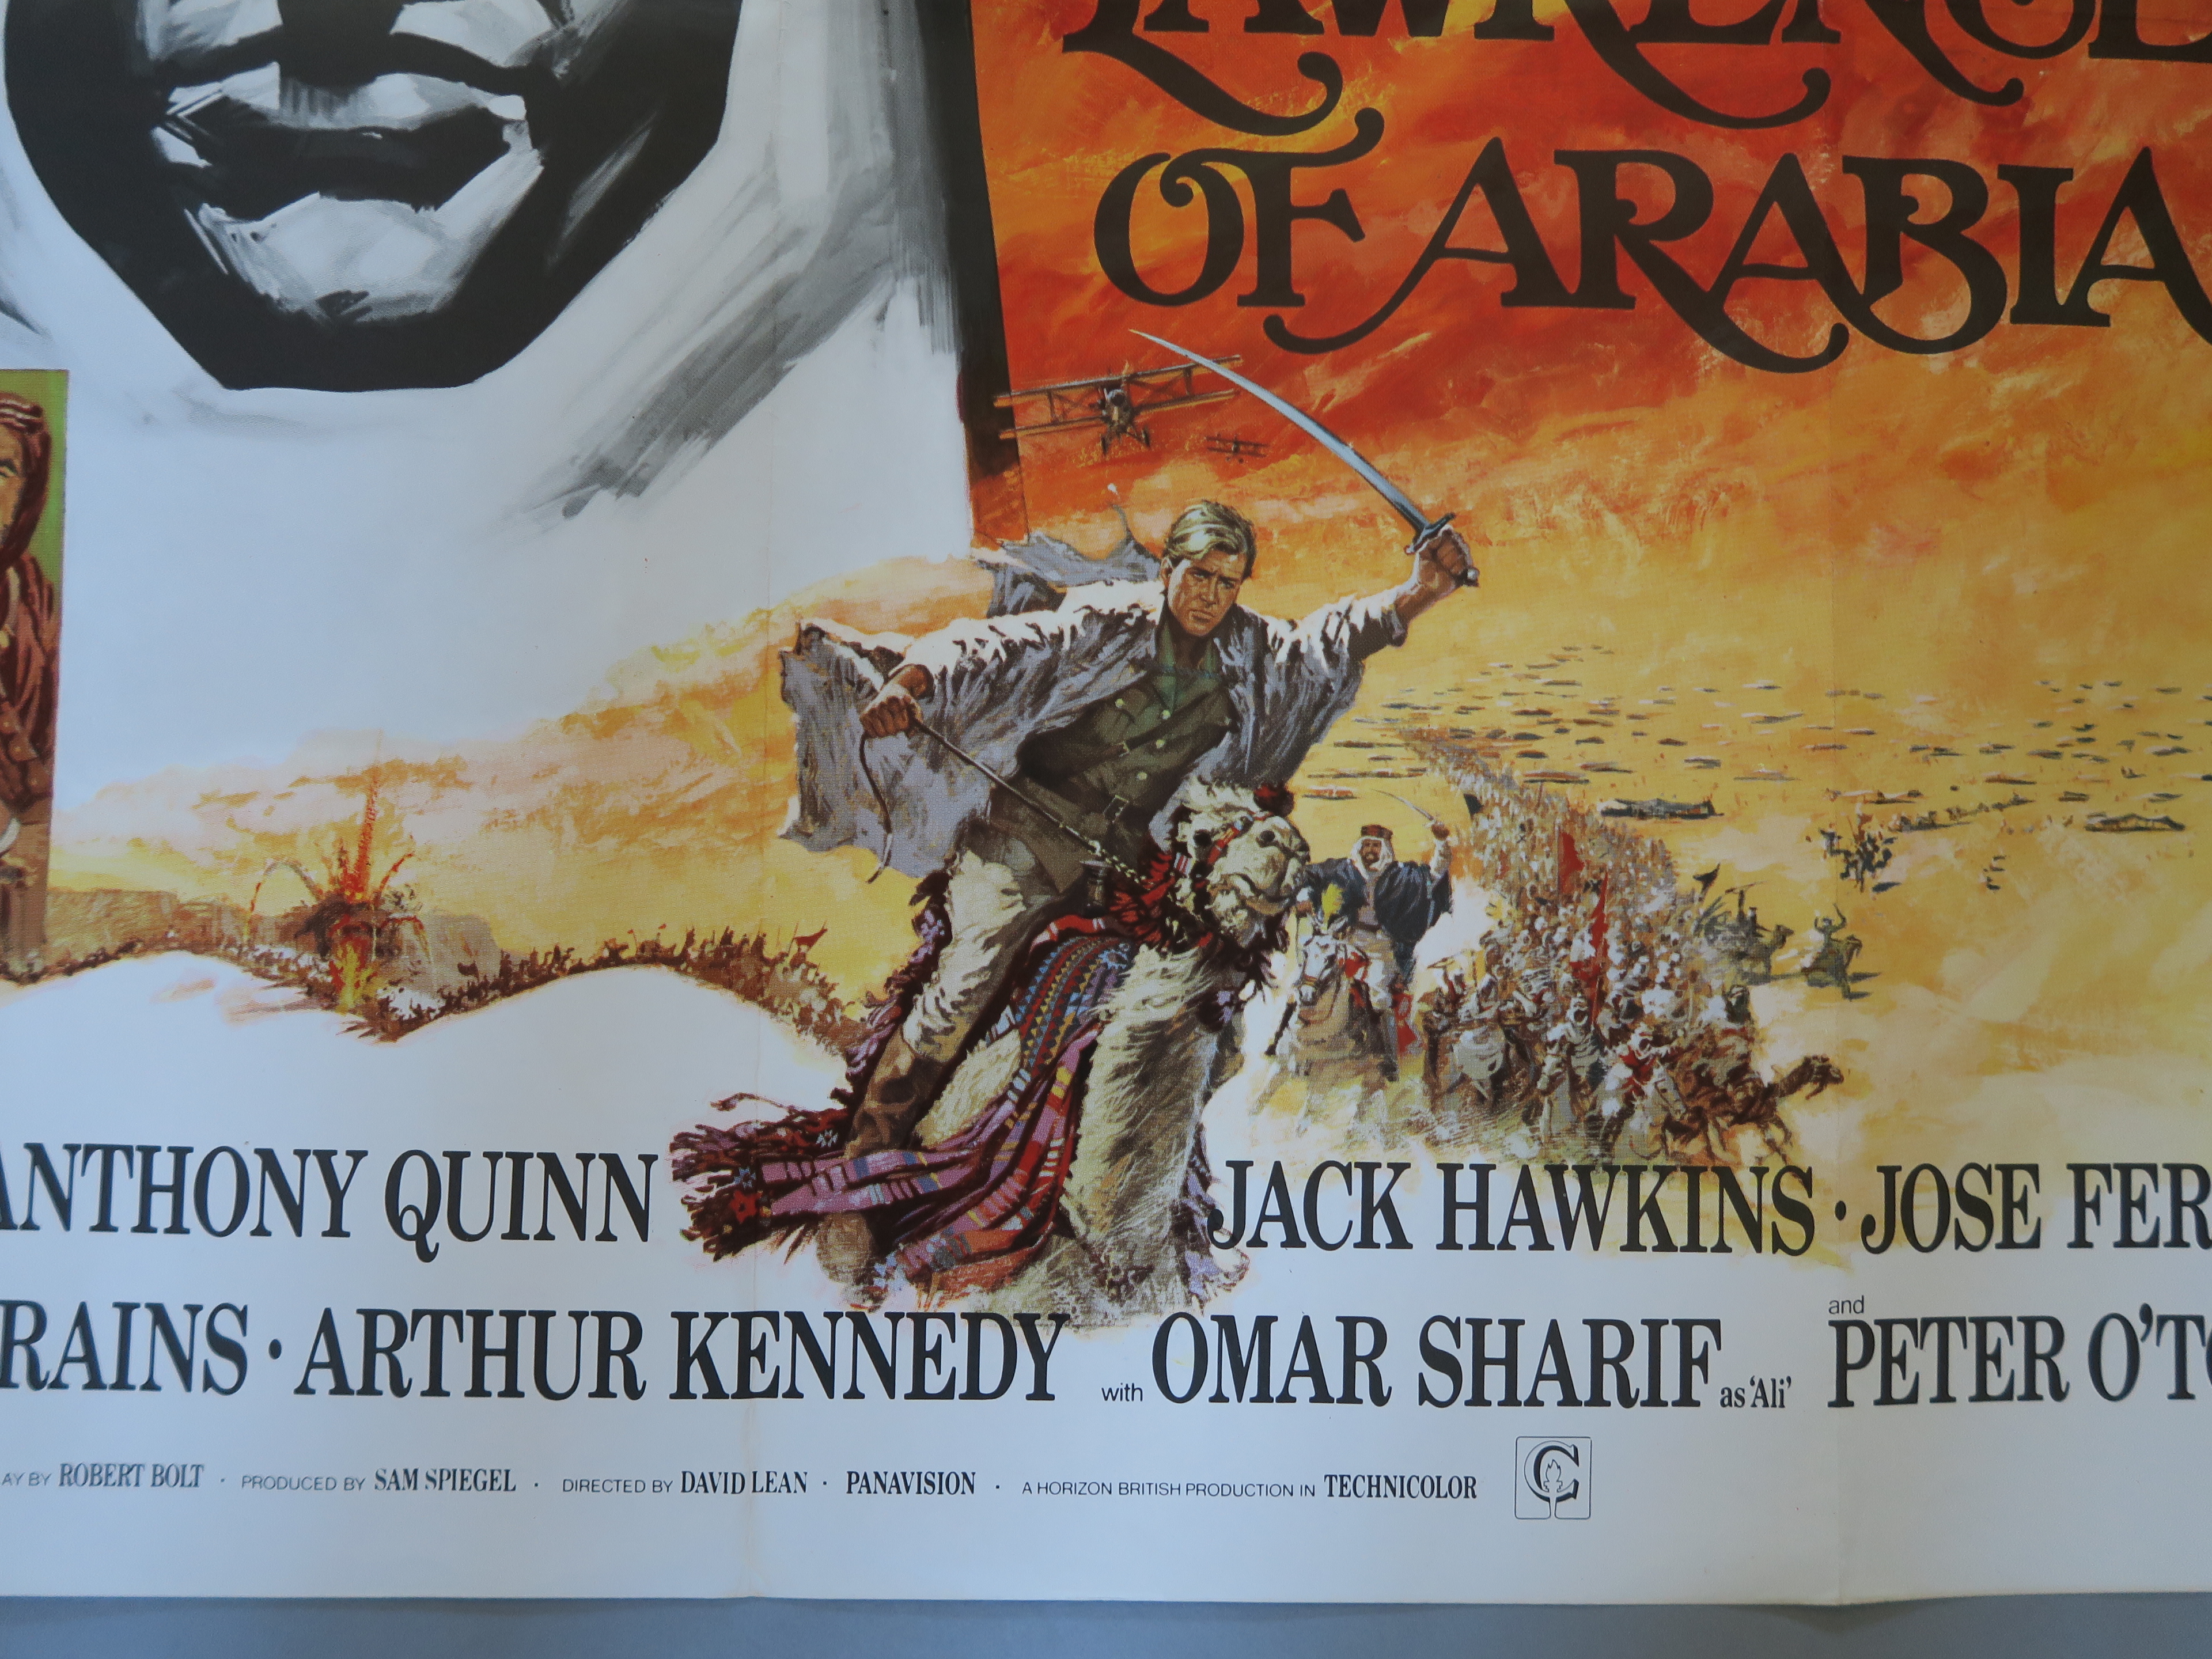 "Lawrence of Arabia" British Quad film poster picturing Peter O Toole as Lawrence plus Omar Shariff, - Image 2 of 3